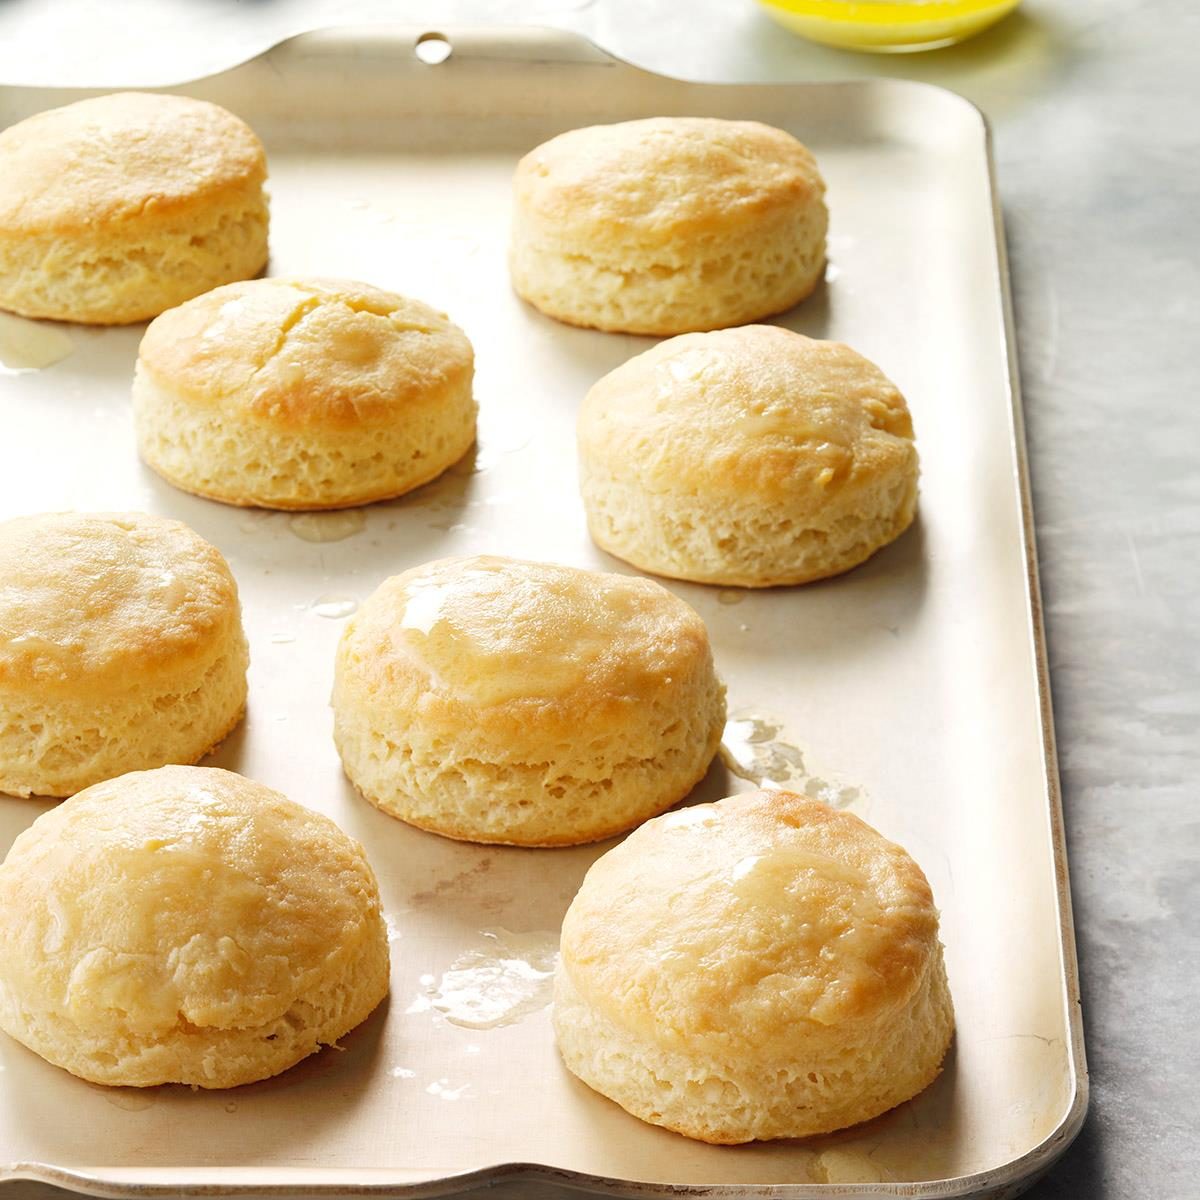  Southern Buttermilk Biscuits Recipe  Taste of Home